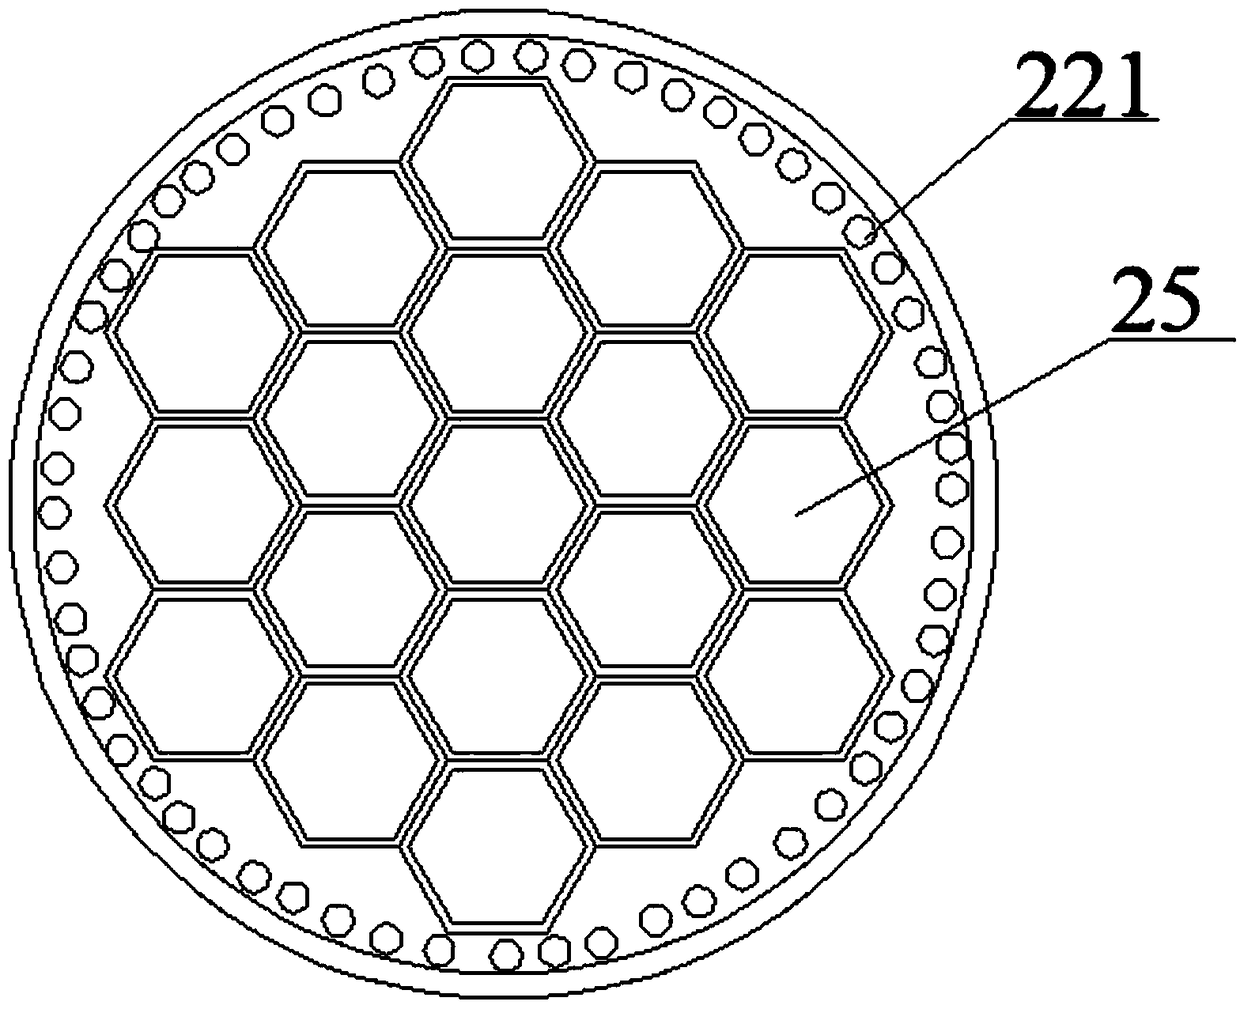 Honeycomb water storage tank capable of efficiently purifying stored water